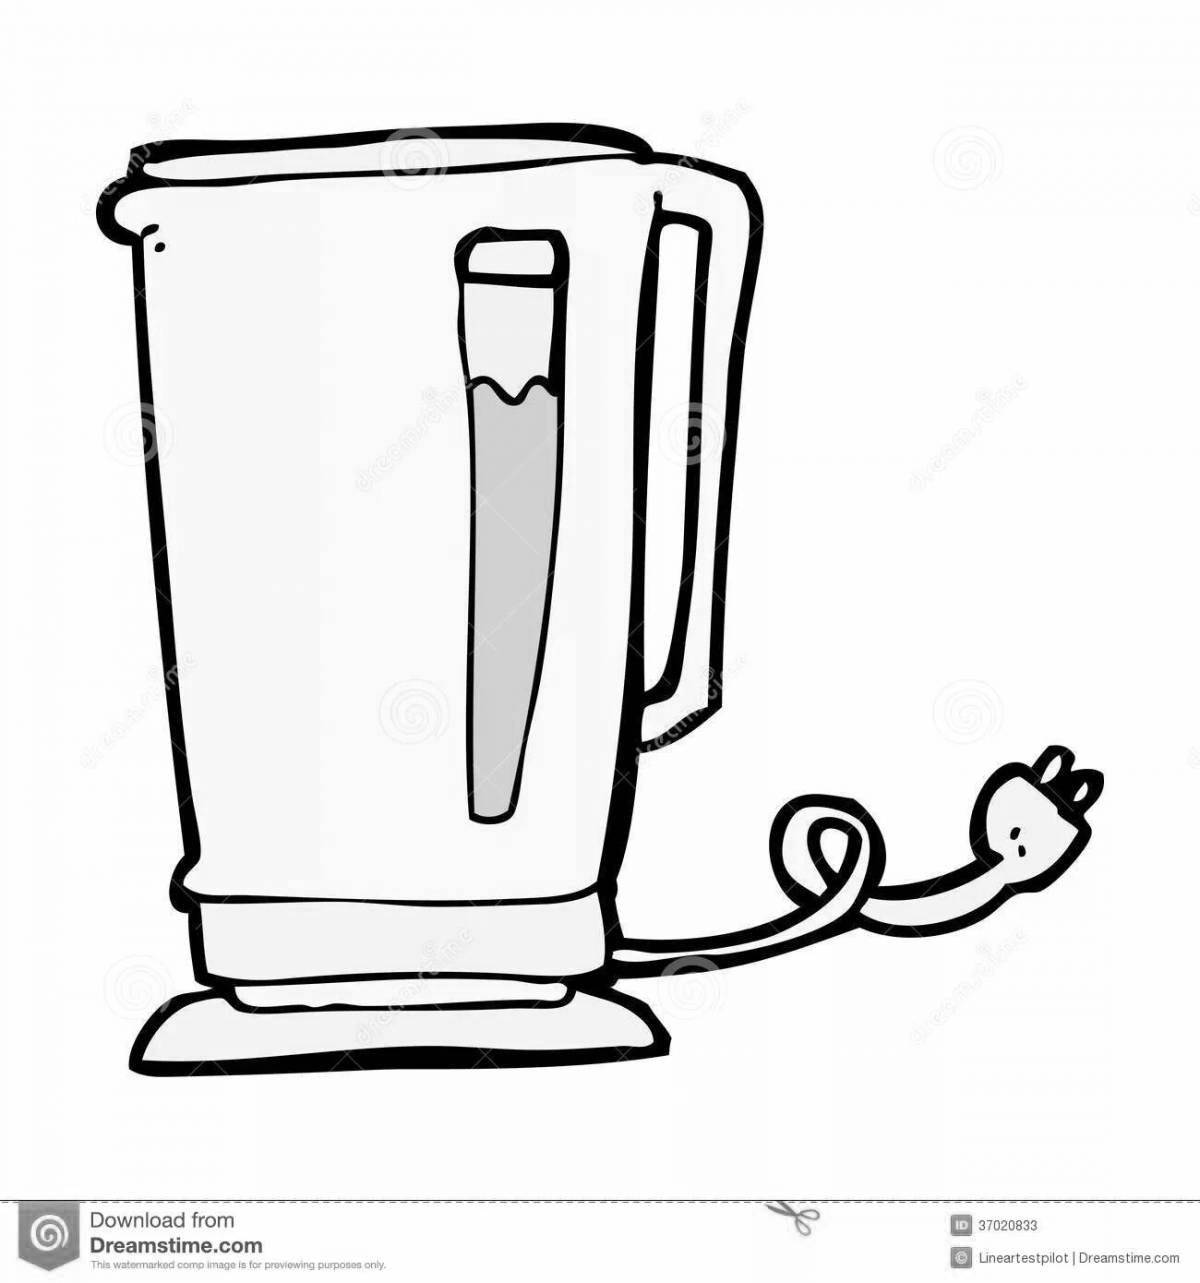 Coloring book magical electric kettle for children